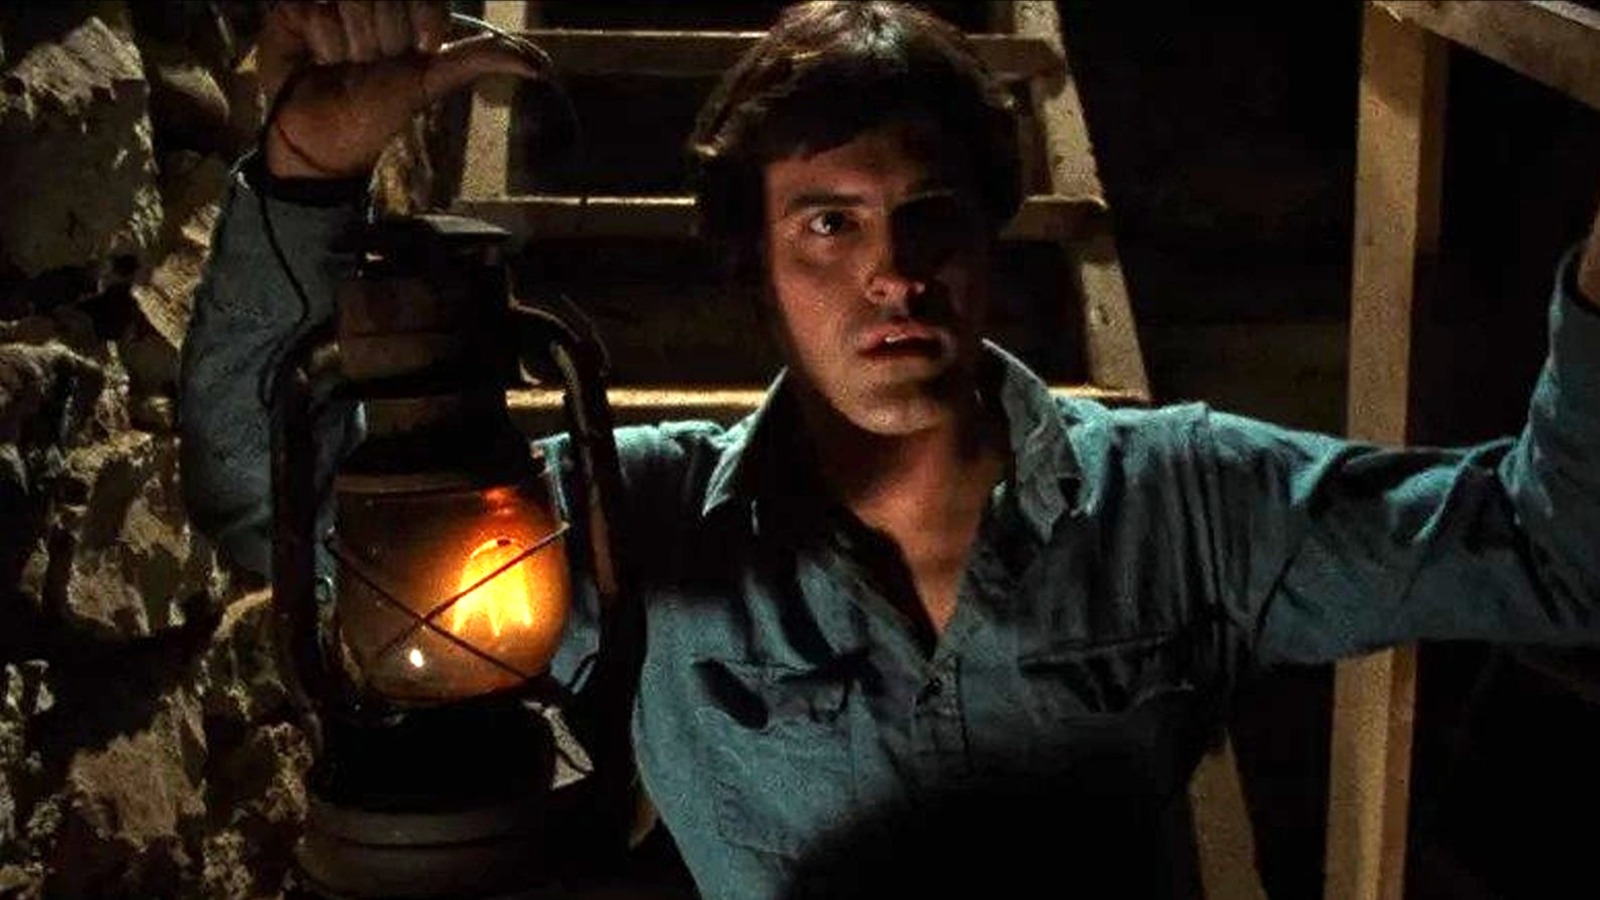 Sam Raimi Is Developing A New Evil Dead Film, But It Might Not Feature Ash  - GameSpot